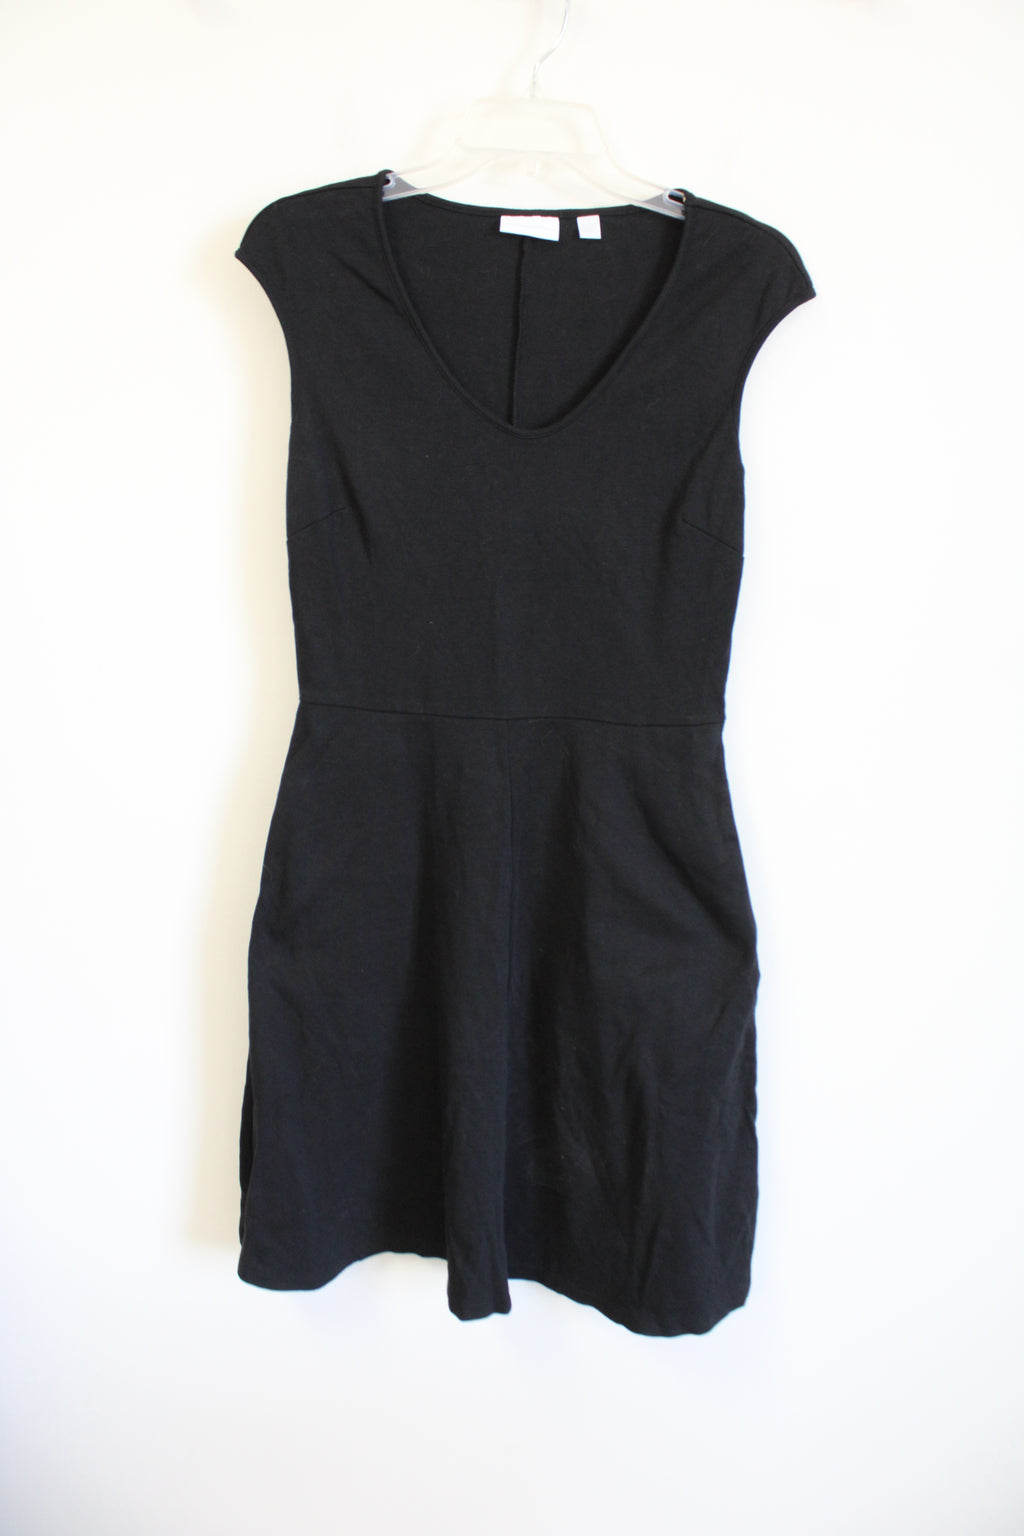 New York & Co. Black Fitted Dress | S